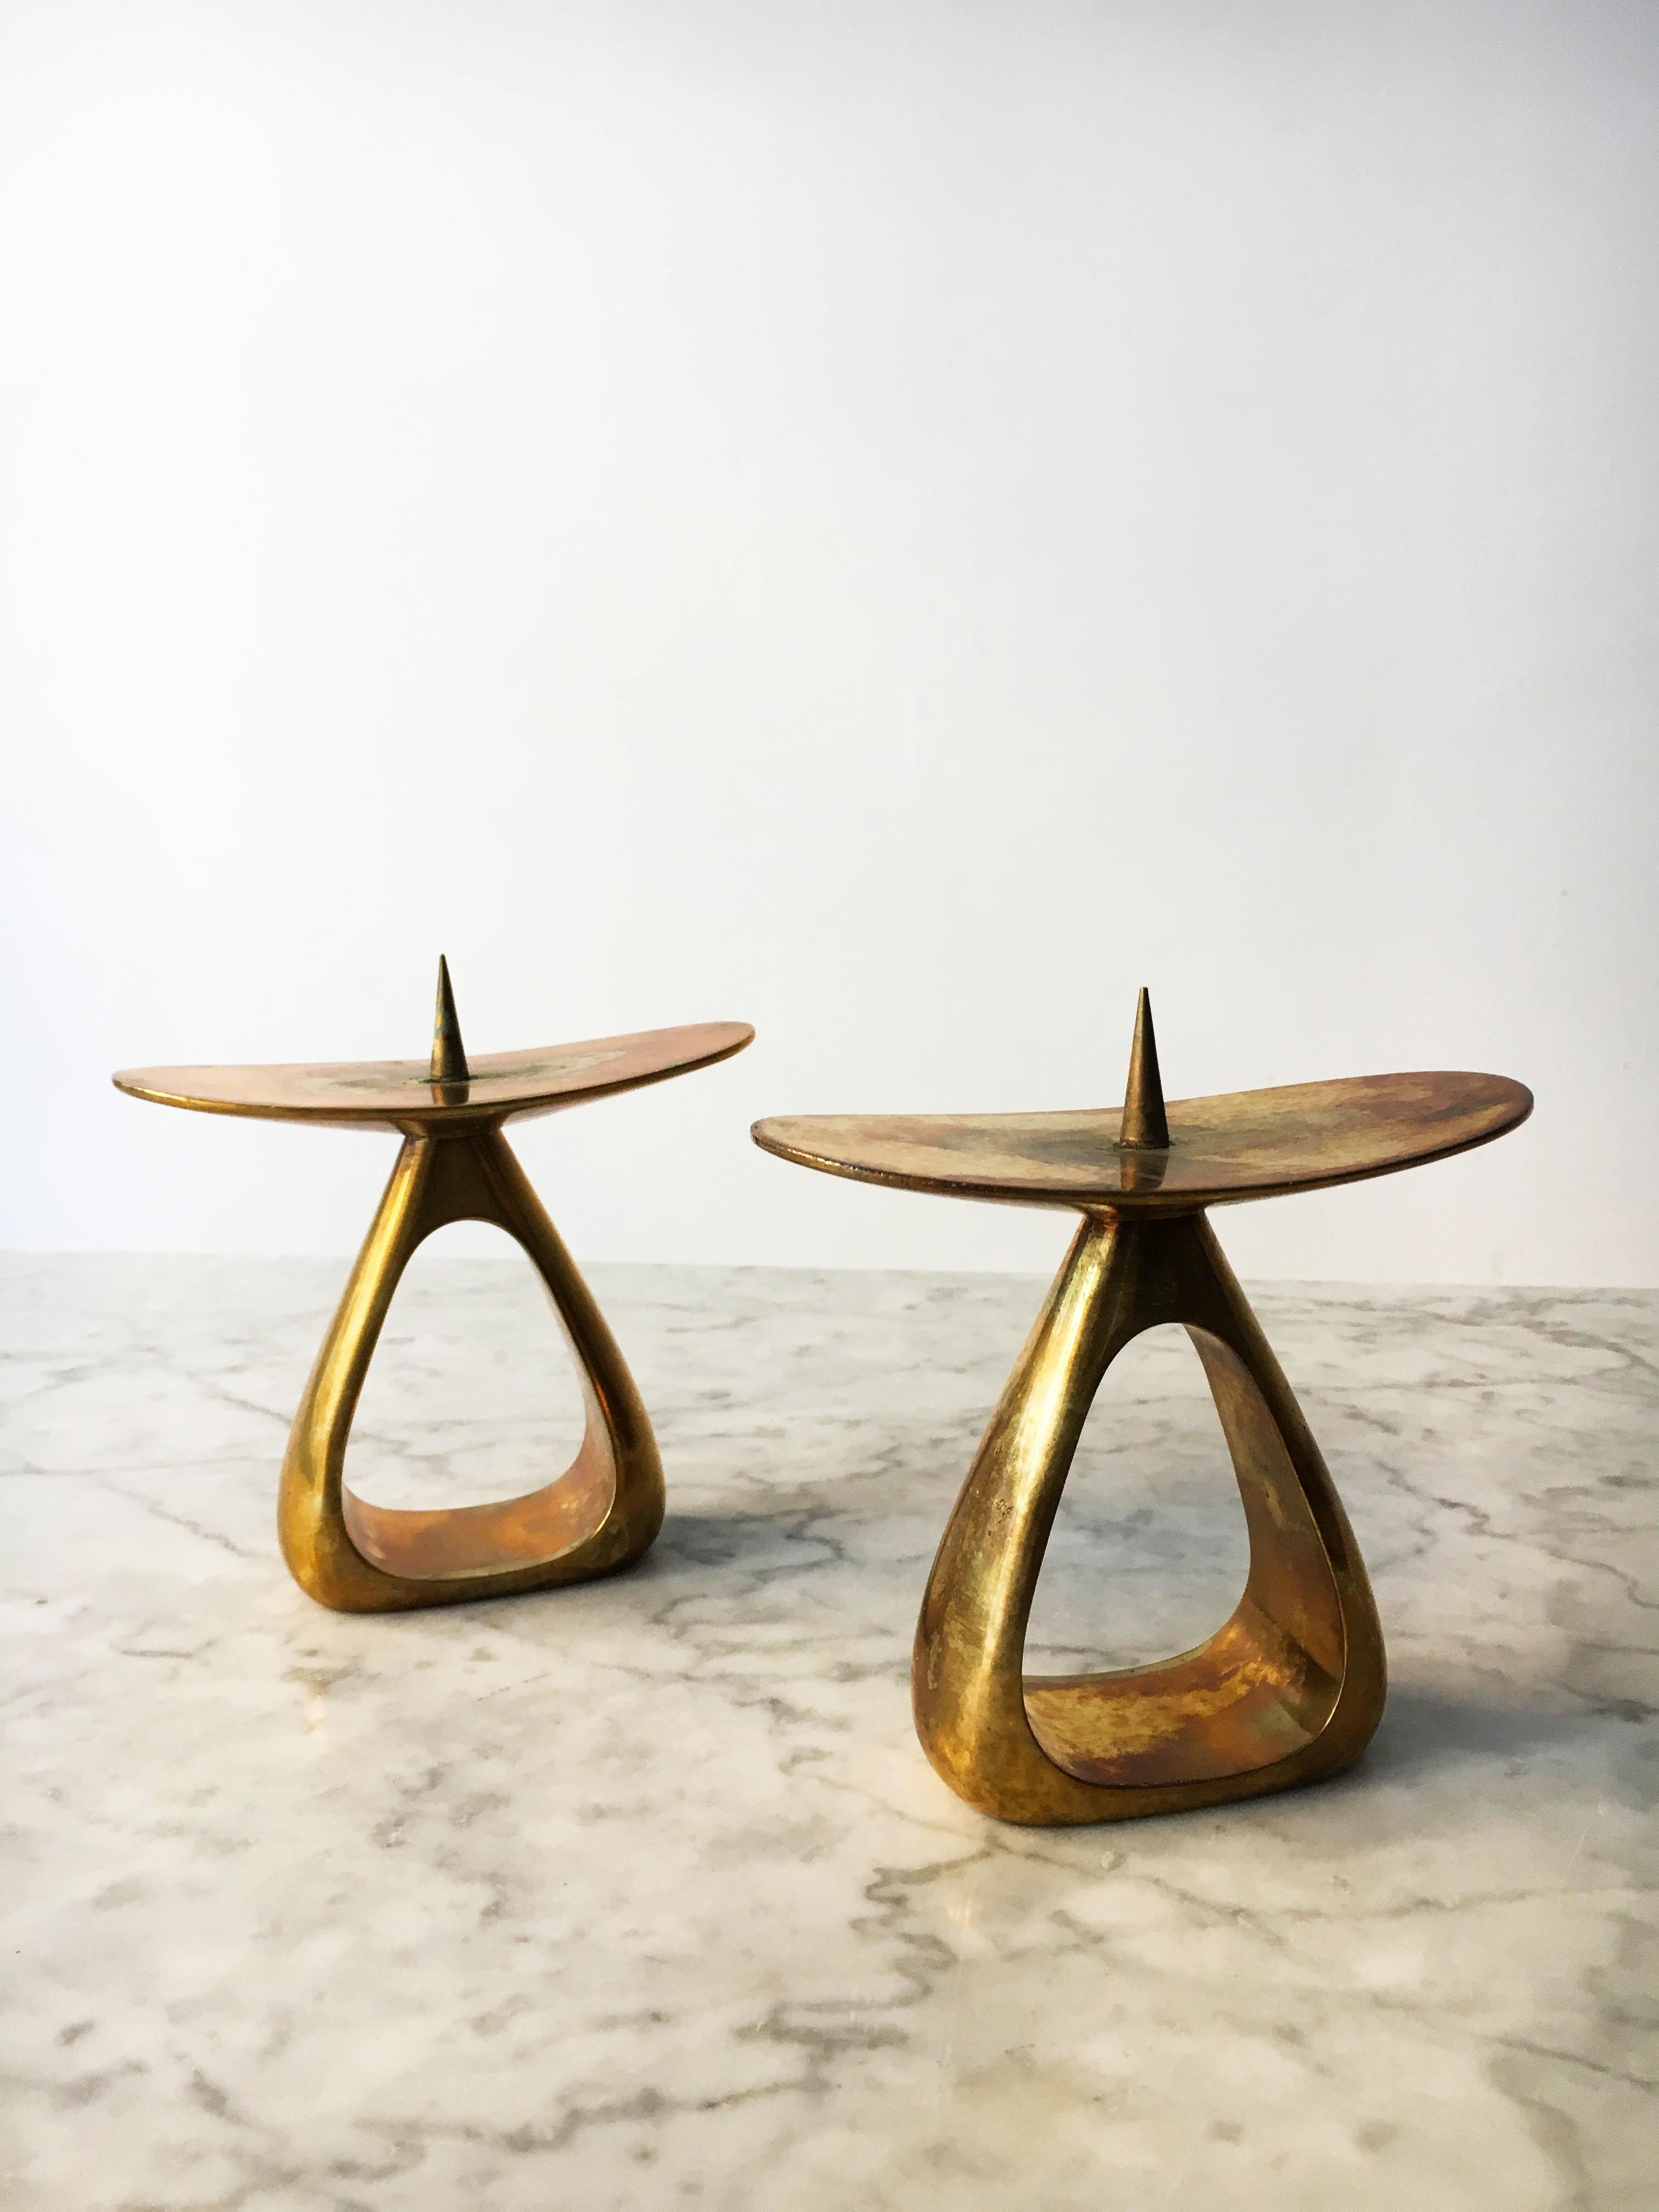 Carl Auböck II Vintage Pair of Brass Candlesticks Model '3600', Austria 1950s. Impressive pair of solid brass sculpted candle holders. Signed: Auböck. Priced and sold as a pair. 